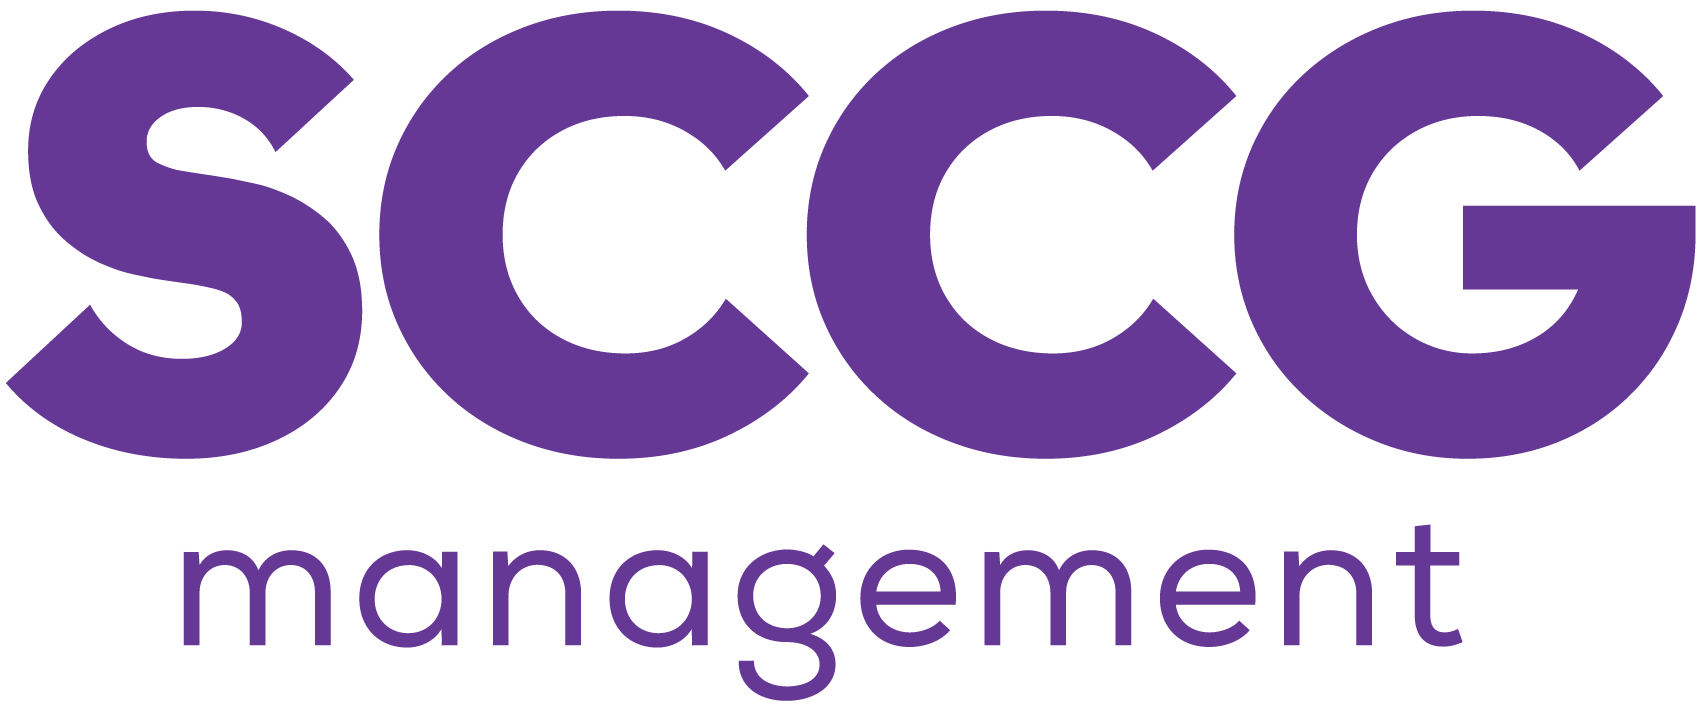 iGaming Consultants & Gambling Advisory | SCCG Management